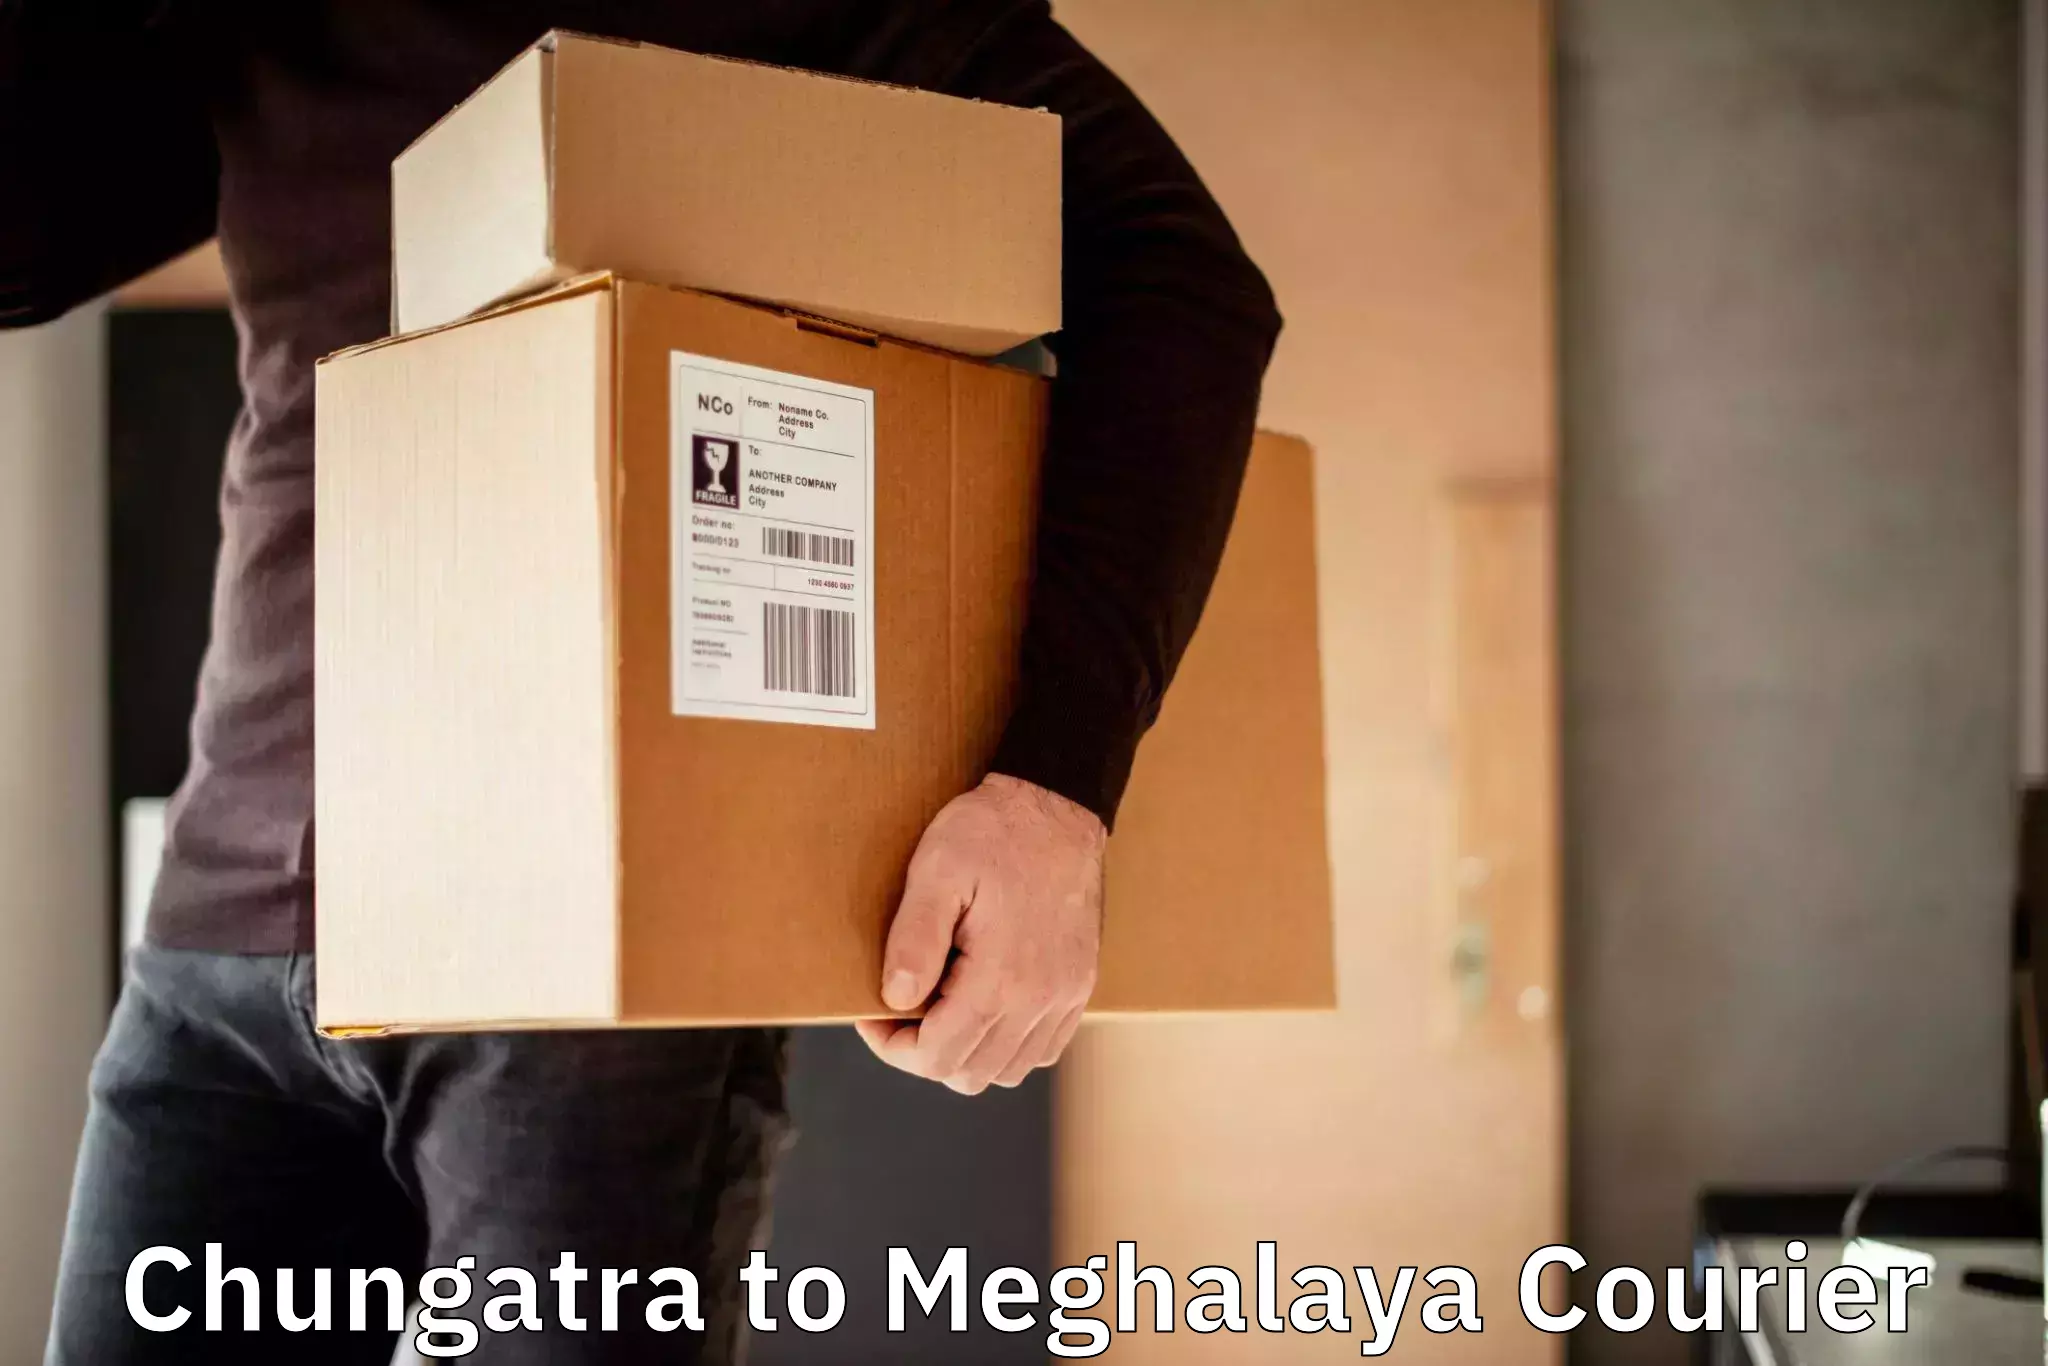 Efficient package consolidation Chungatra to Meghalaya